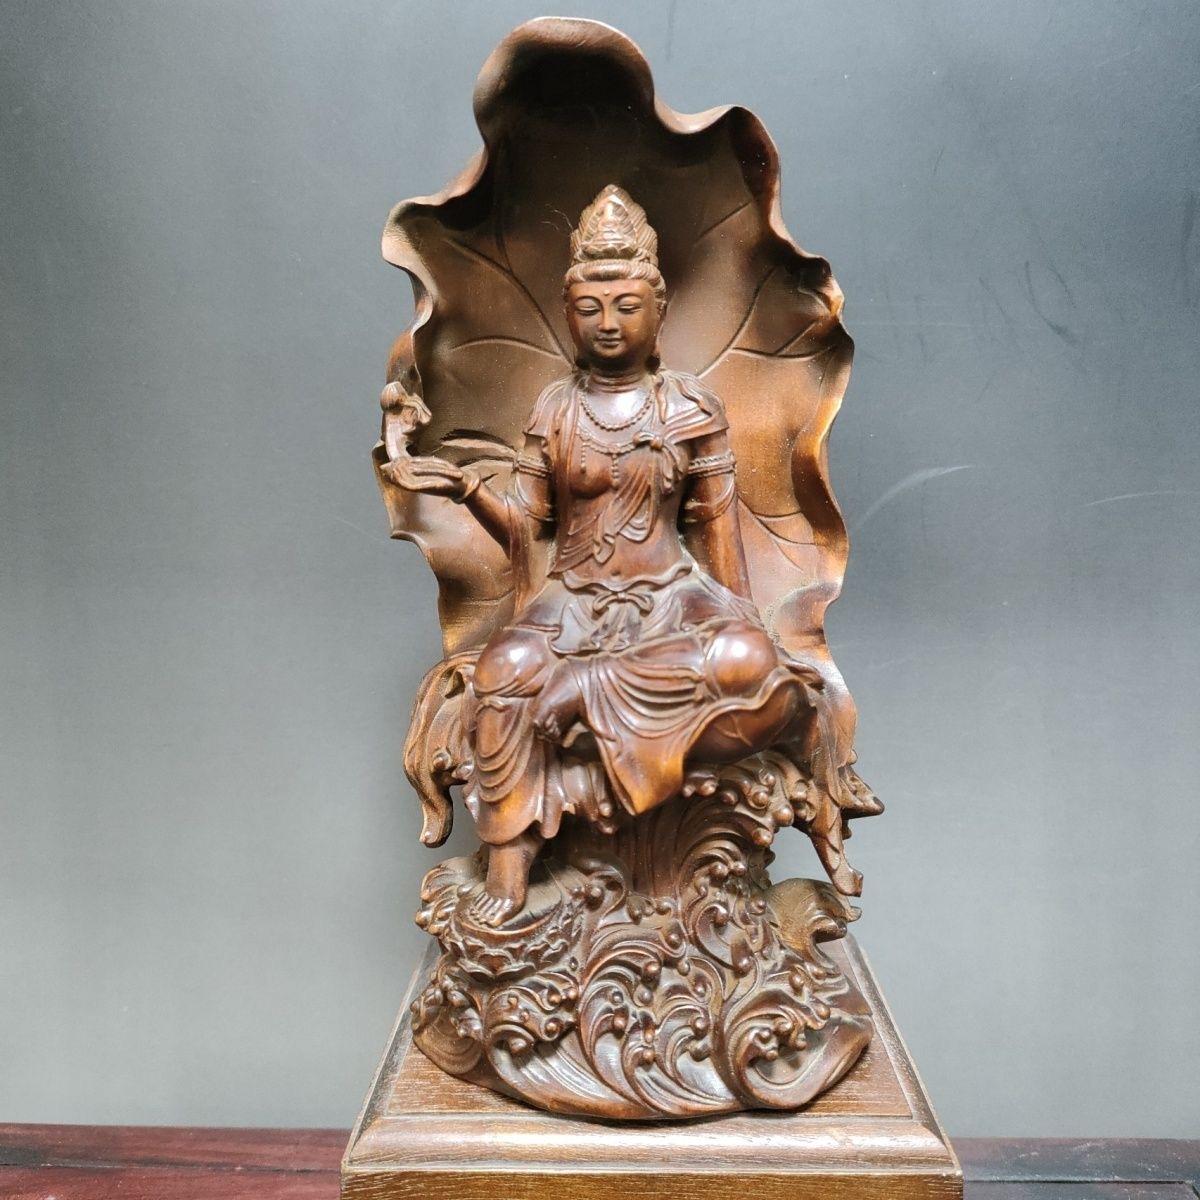 This Chinese Old Wood Sitting on Lotus Buddha Statue is a truly unique and special collectible piece.  

Buddha statue details:
Material: boxwood
Height: 15cm
Diameter: 8cm
Weight: 176g
Originating from China

Free shipping by DHL from Hongkong